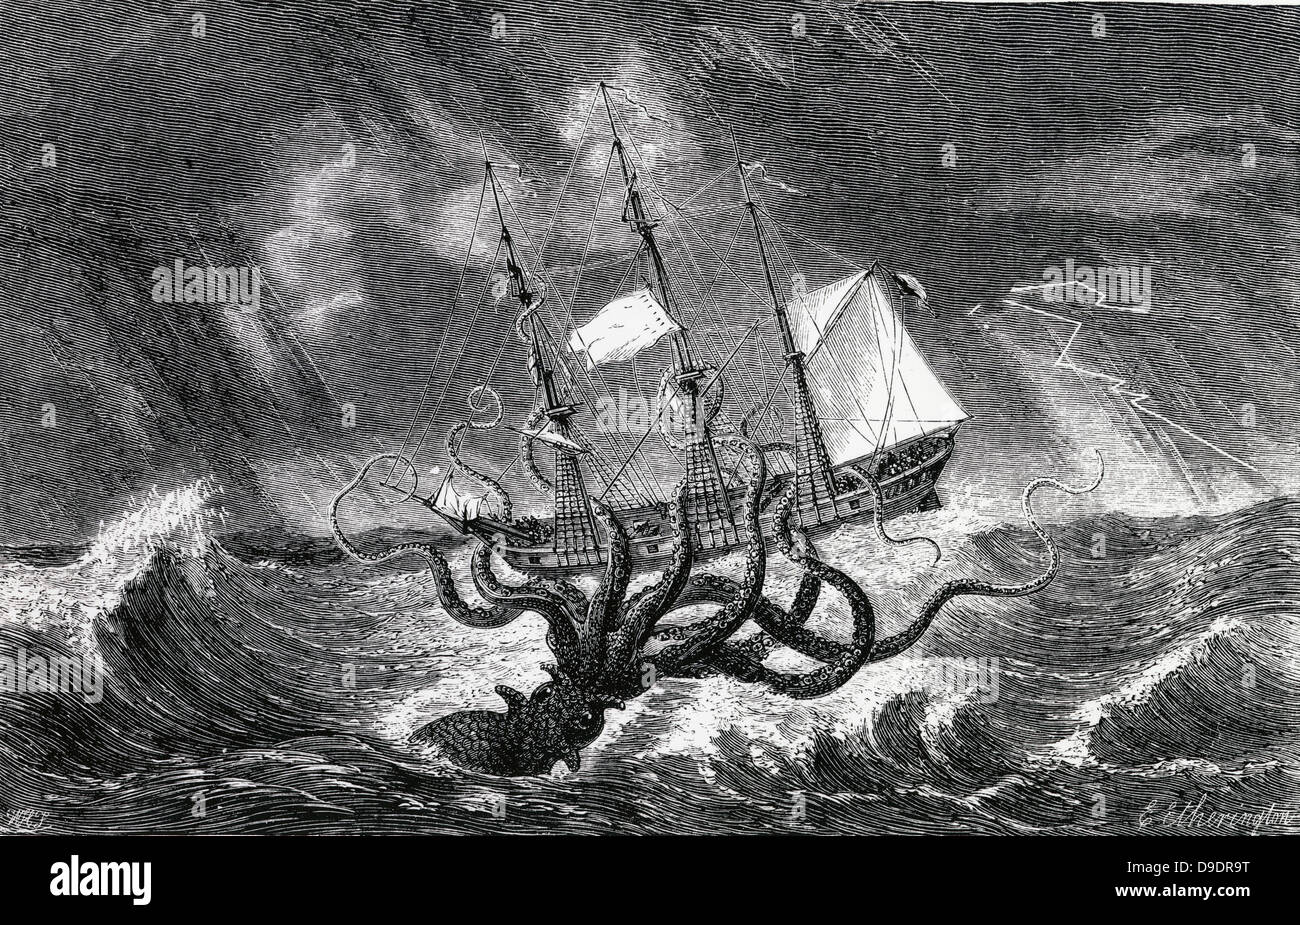 Legendary Kraken, monster of the deep, pictured as a giant squid. Engraving 1870. Stock Photo